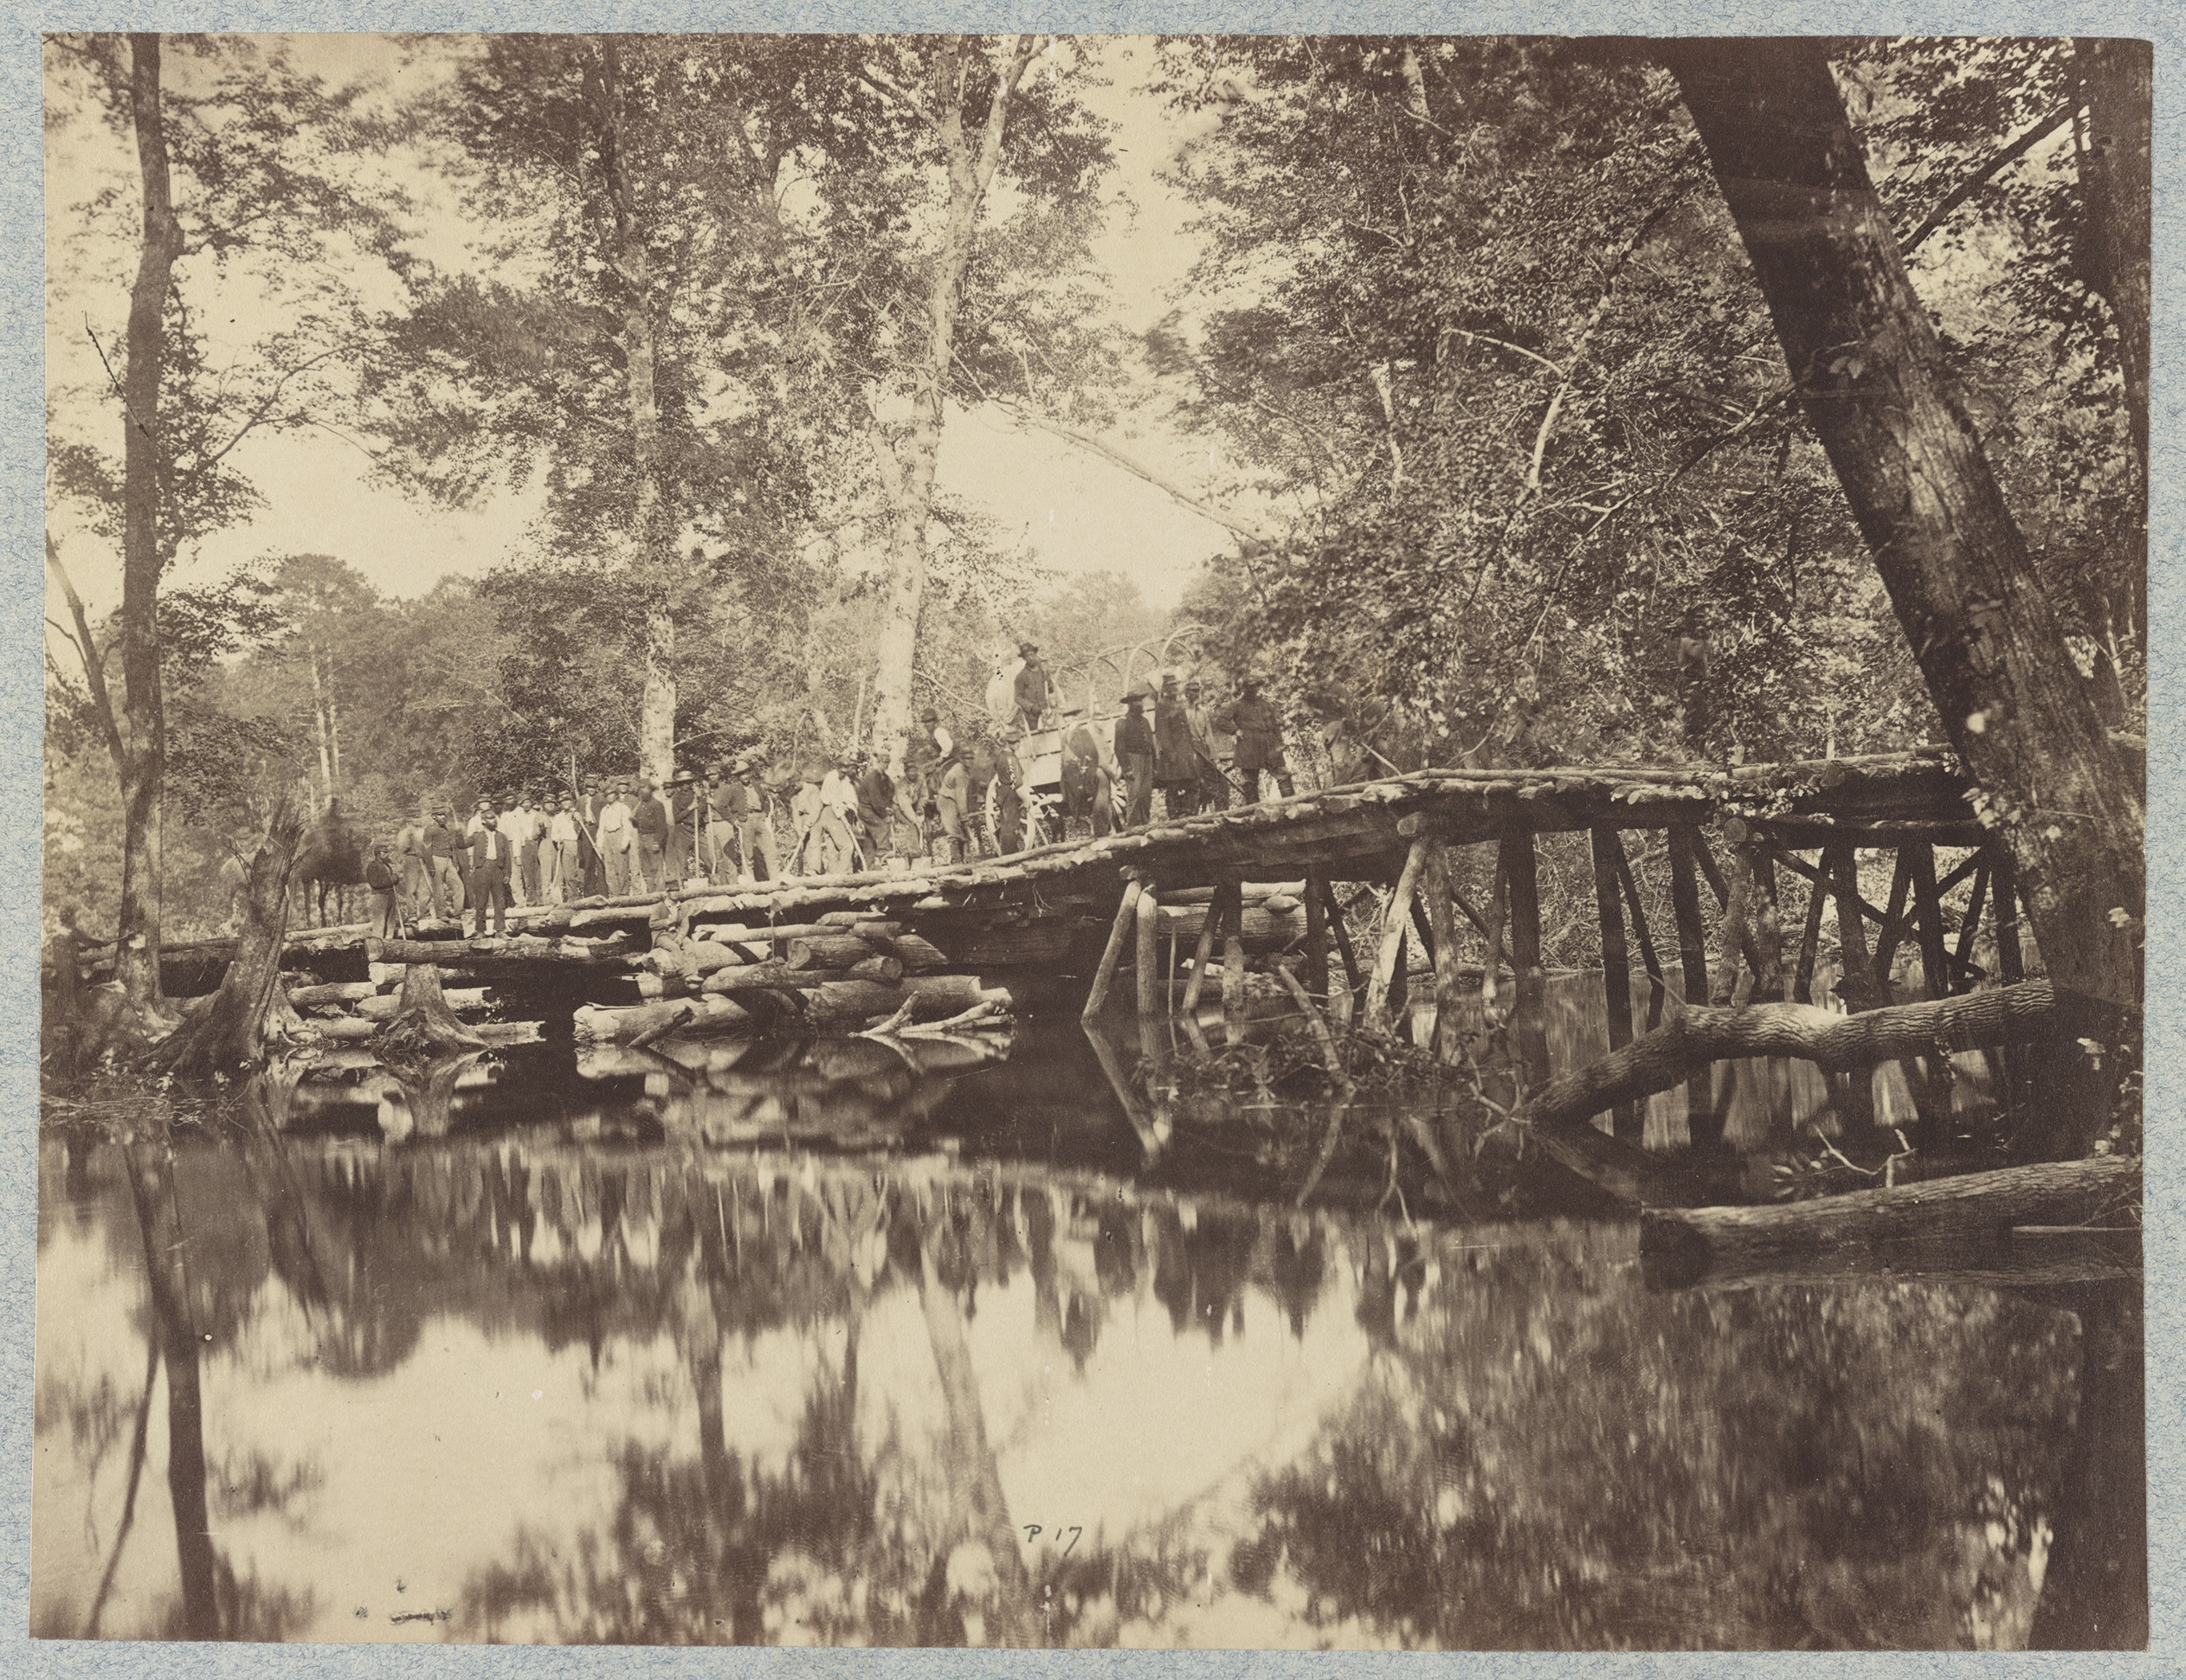 Union troops detailed to build Woodbury’s Bridge are reflected in the Chickahominy River. The sluggish waterway split McClellan’s force. (Library of Congress)